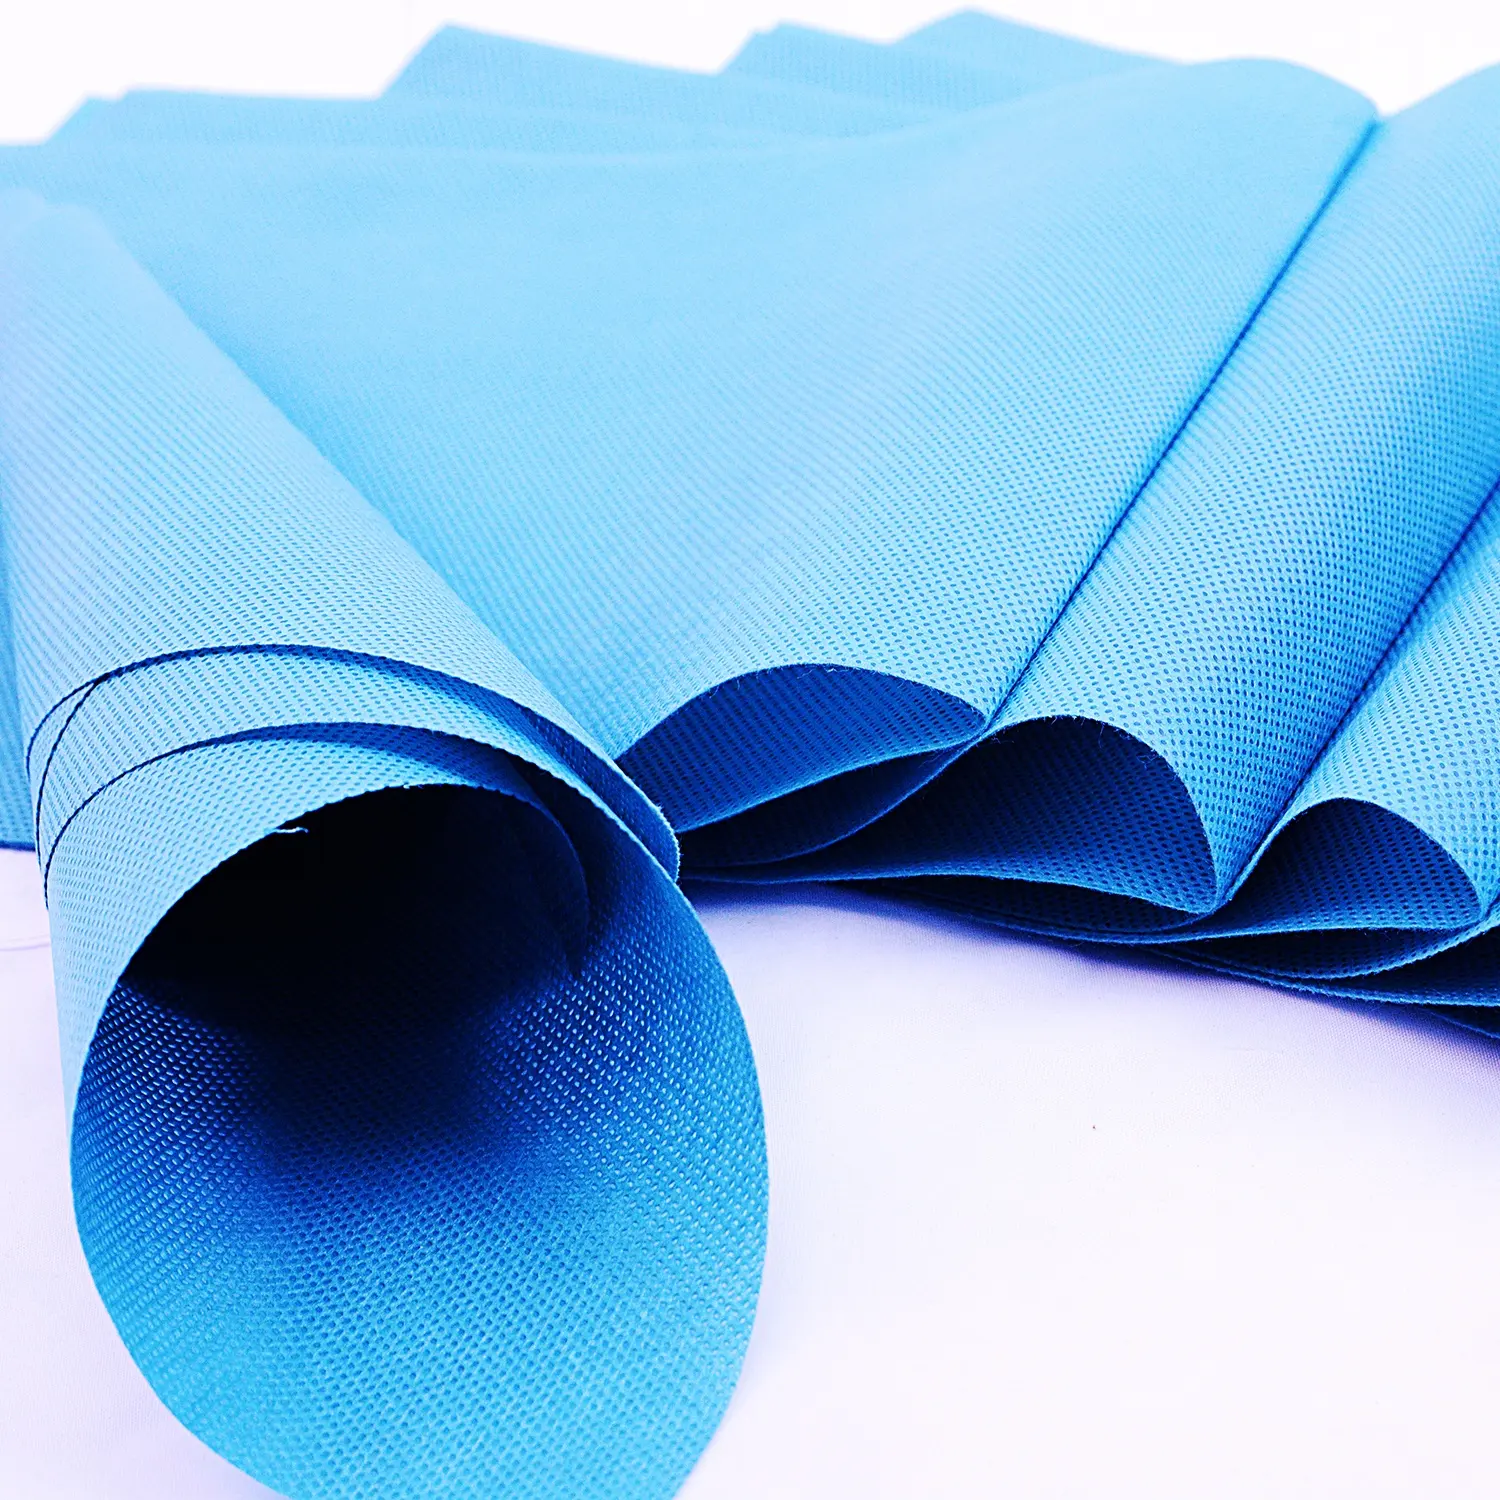 SMS Medical Fabric SMMS SMMMS Medical Grade Sterilization Wrapping Non Woven Fabric